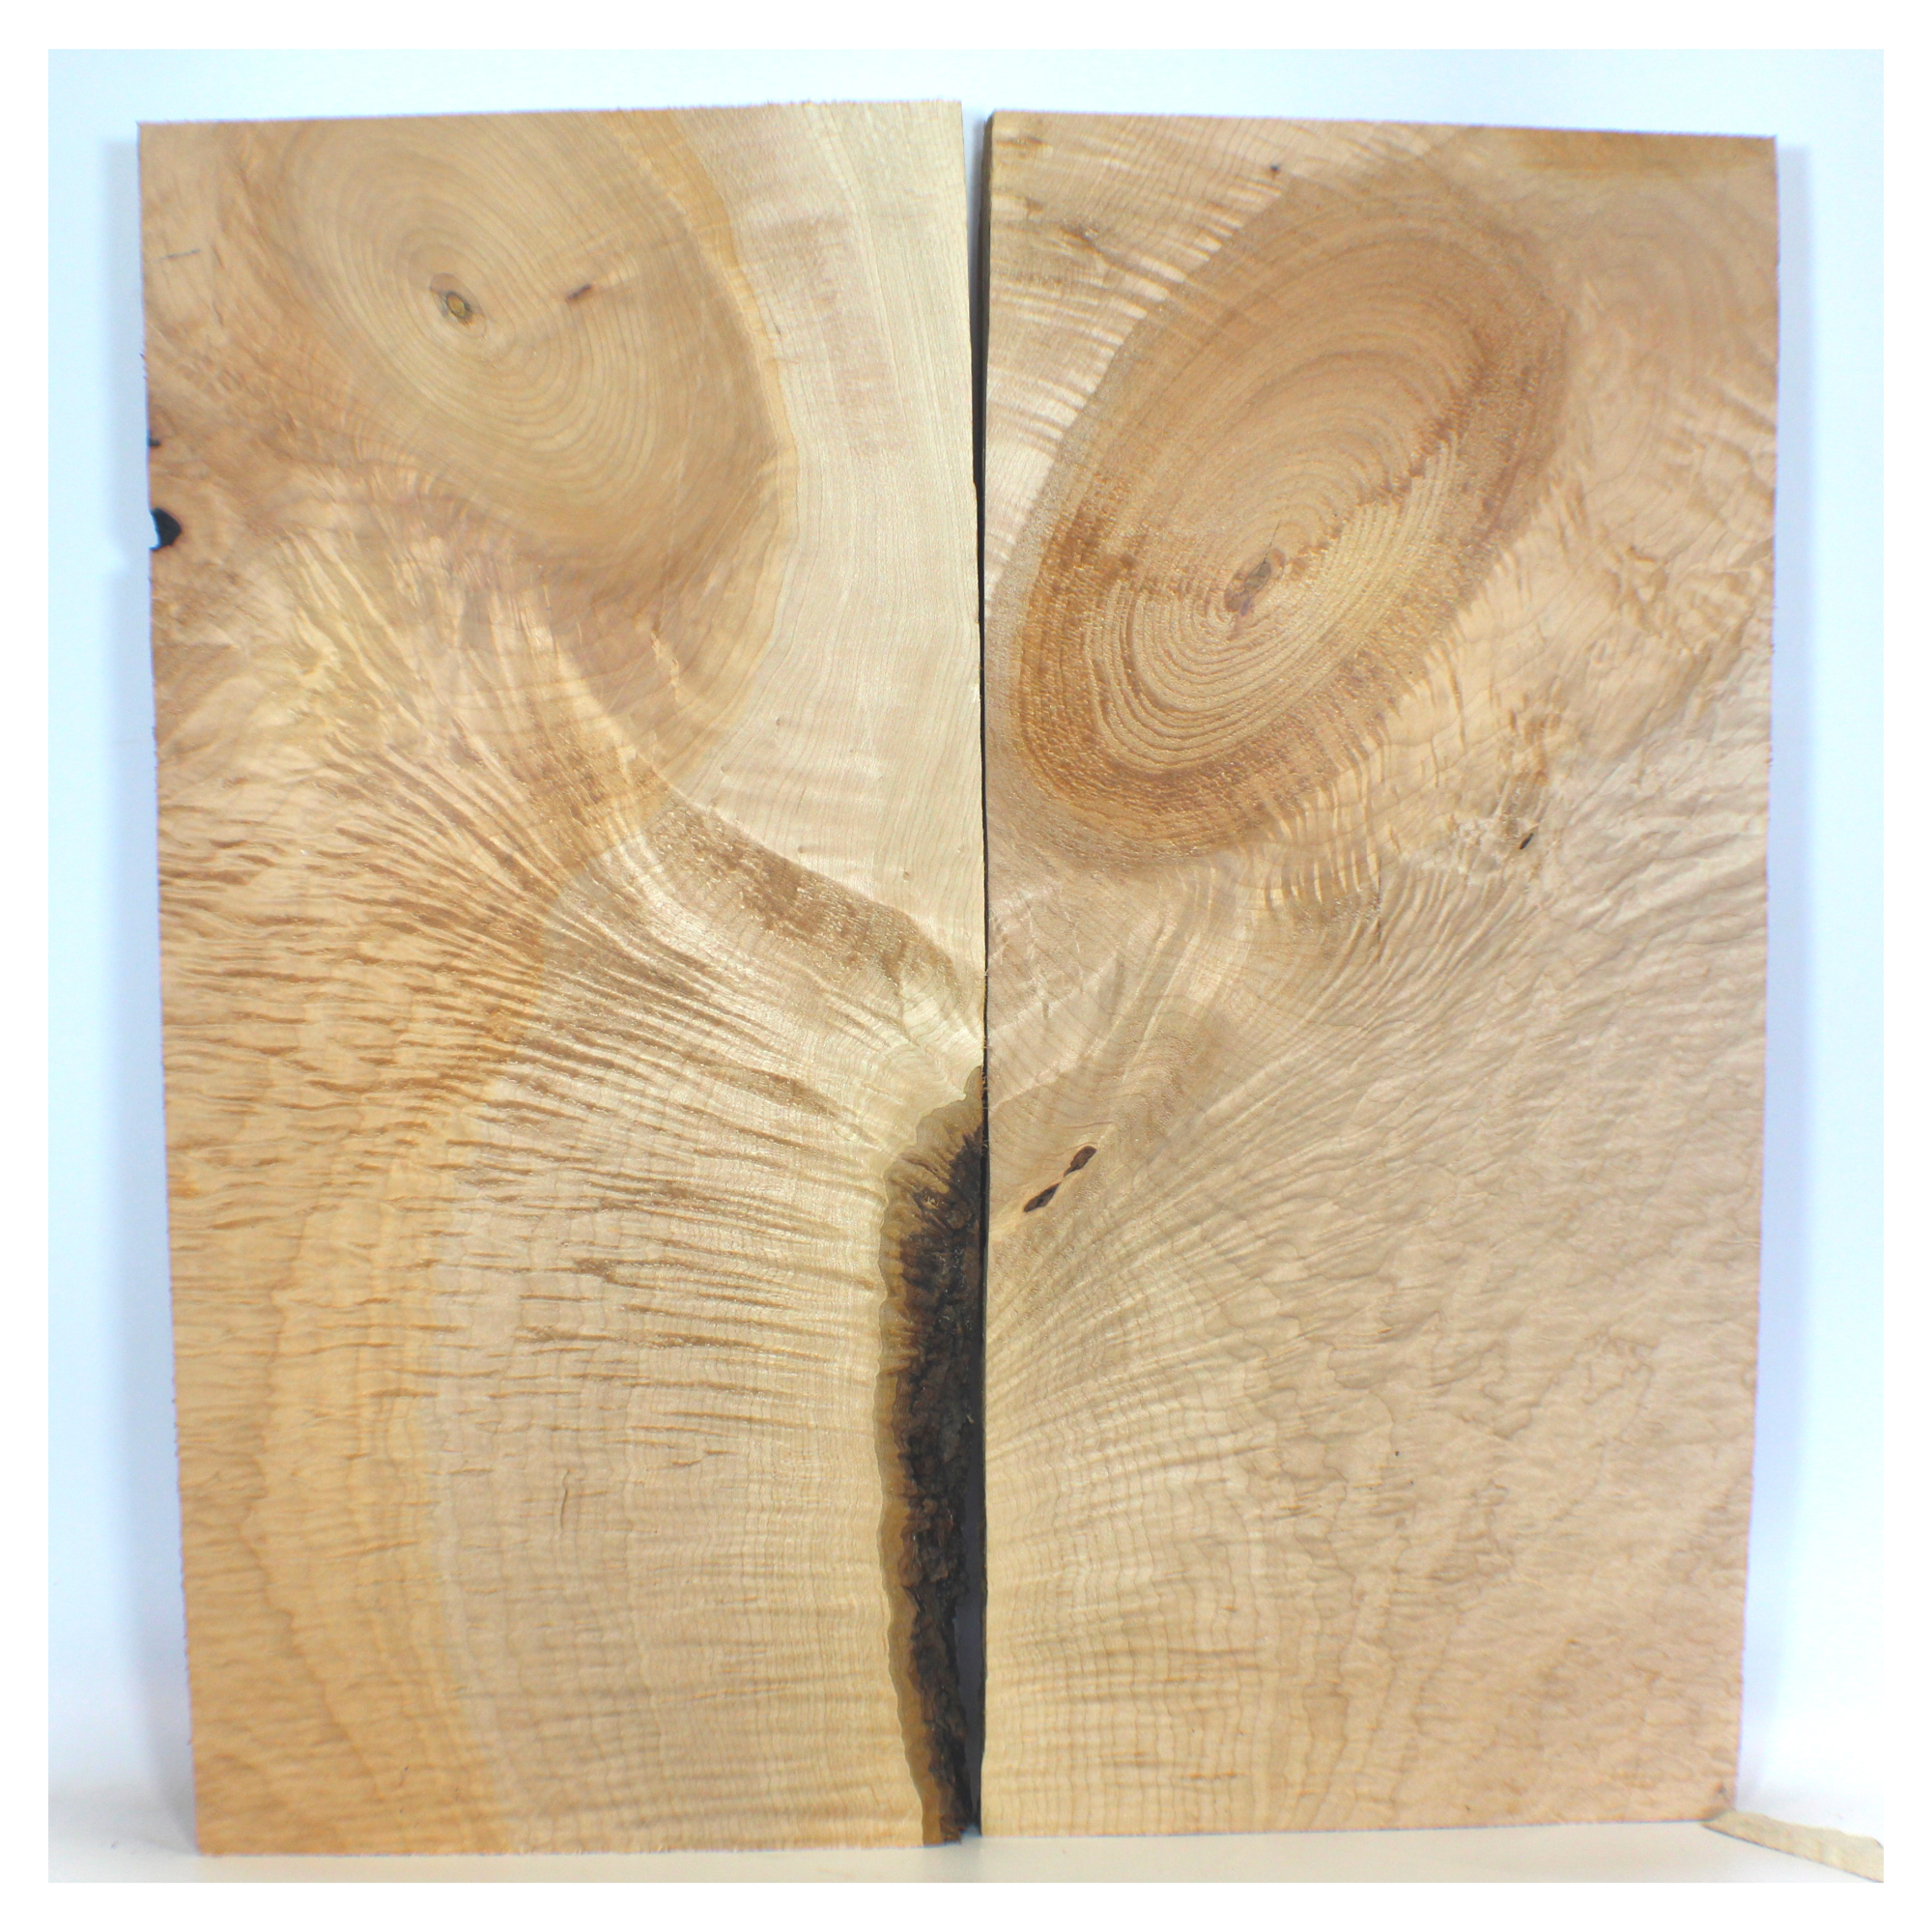 Unique flat sawn flame maple book-matched set with large knot, two-toned color, and swirly angel set figure.  Dimensions: Thickness each piece: 1.25